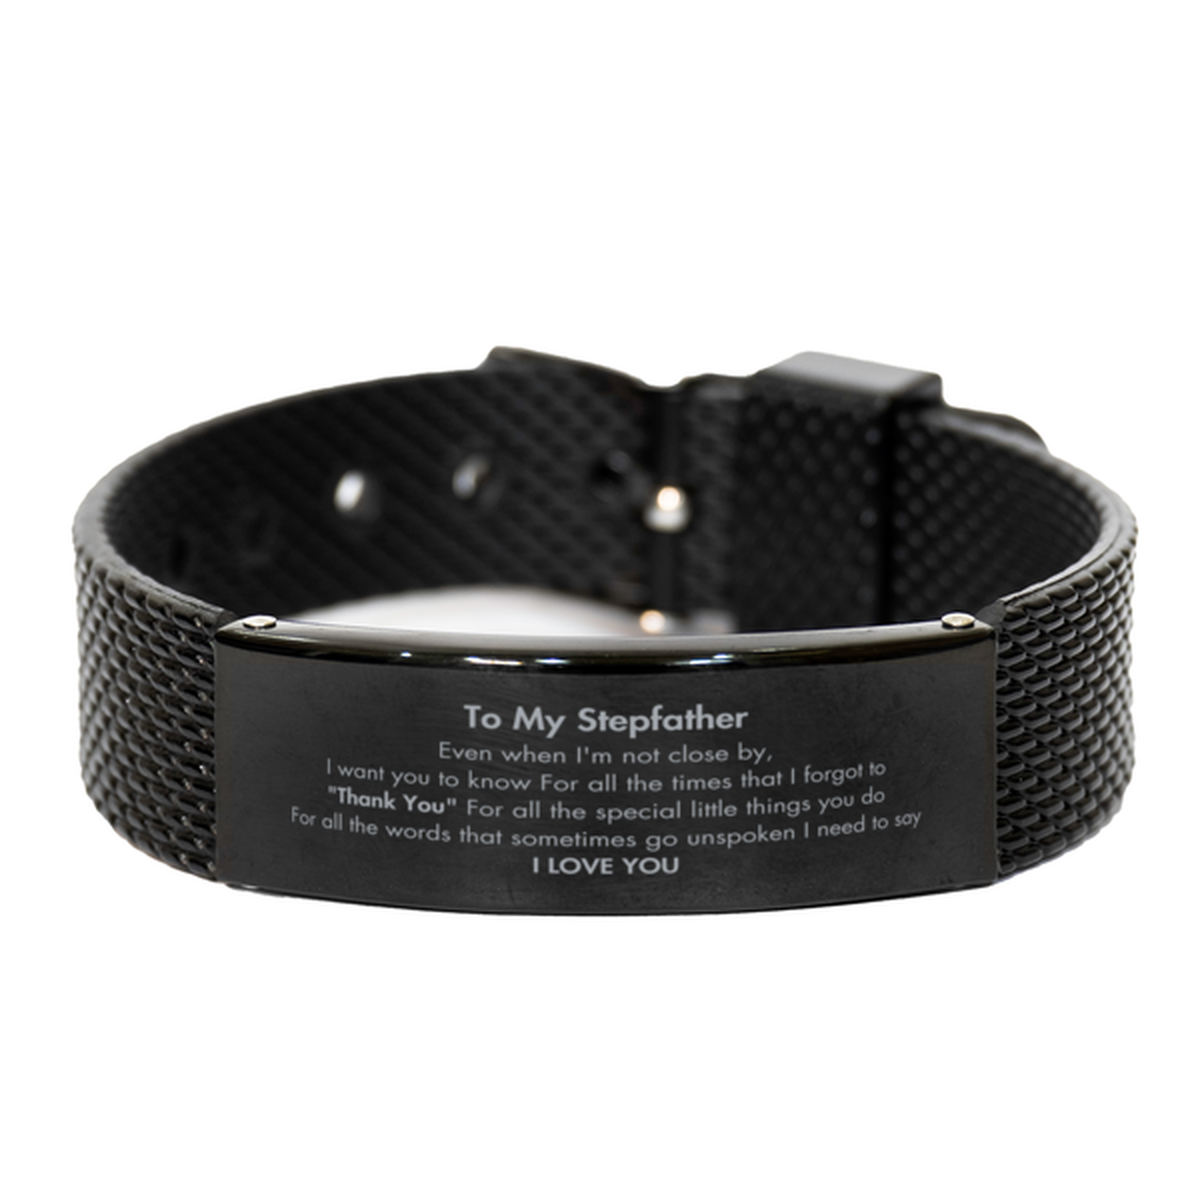 Thank You Gifts for Stepfather, Keepsake Black Shark Mesh Bracelet Gifts for Stepfather Birthday Mother's day Father's Day Stepfather For all the words That sometimes go unspoken I need to say I LOVE YOU